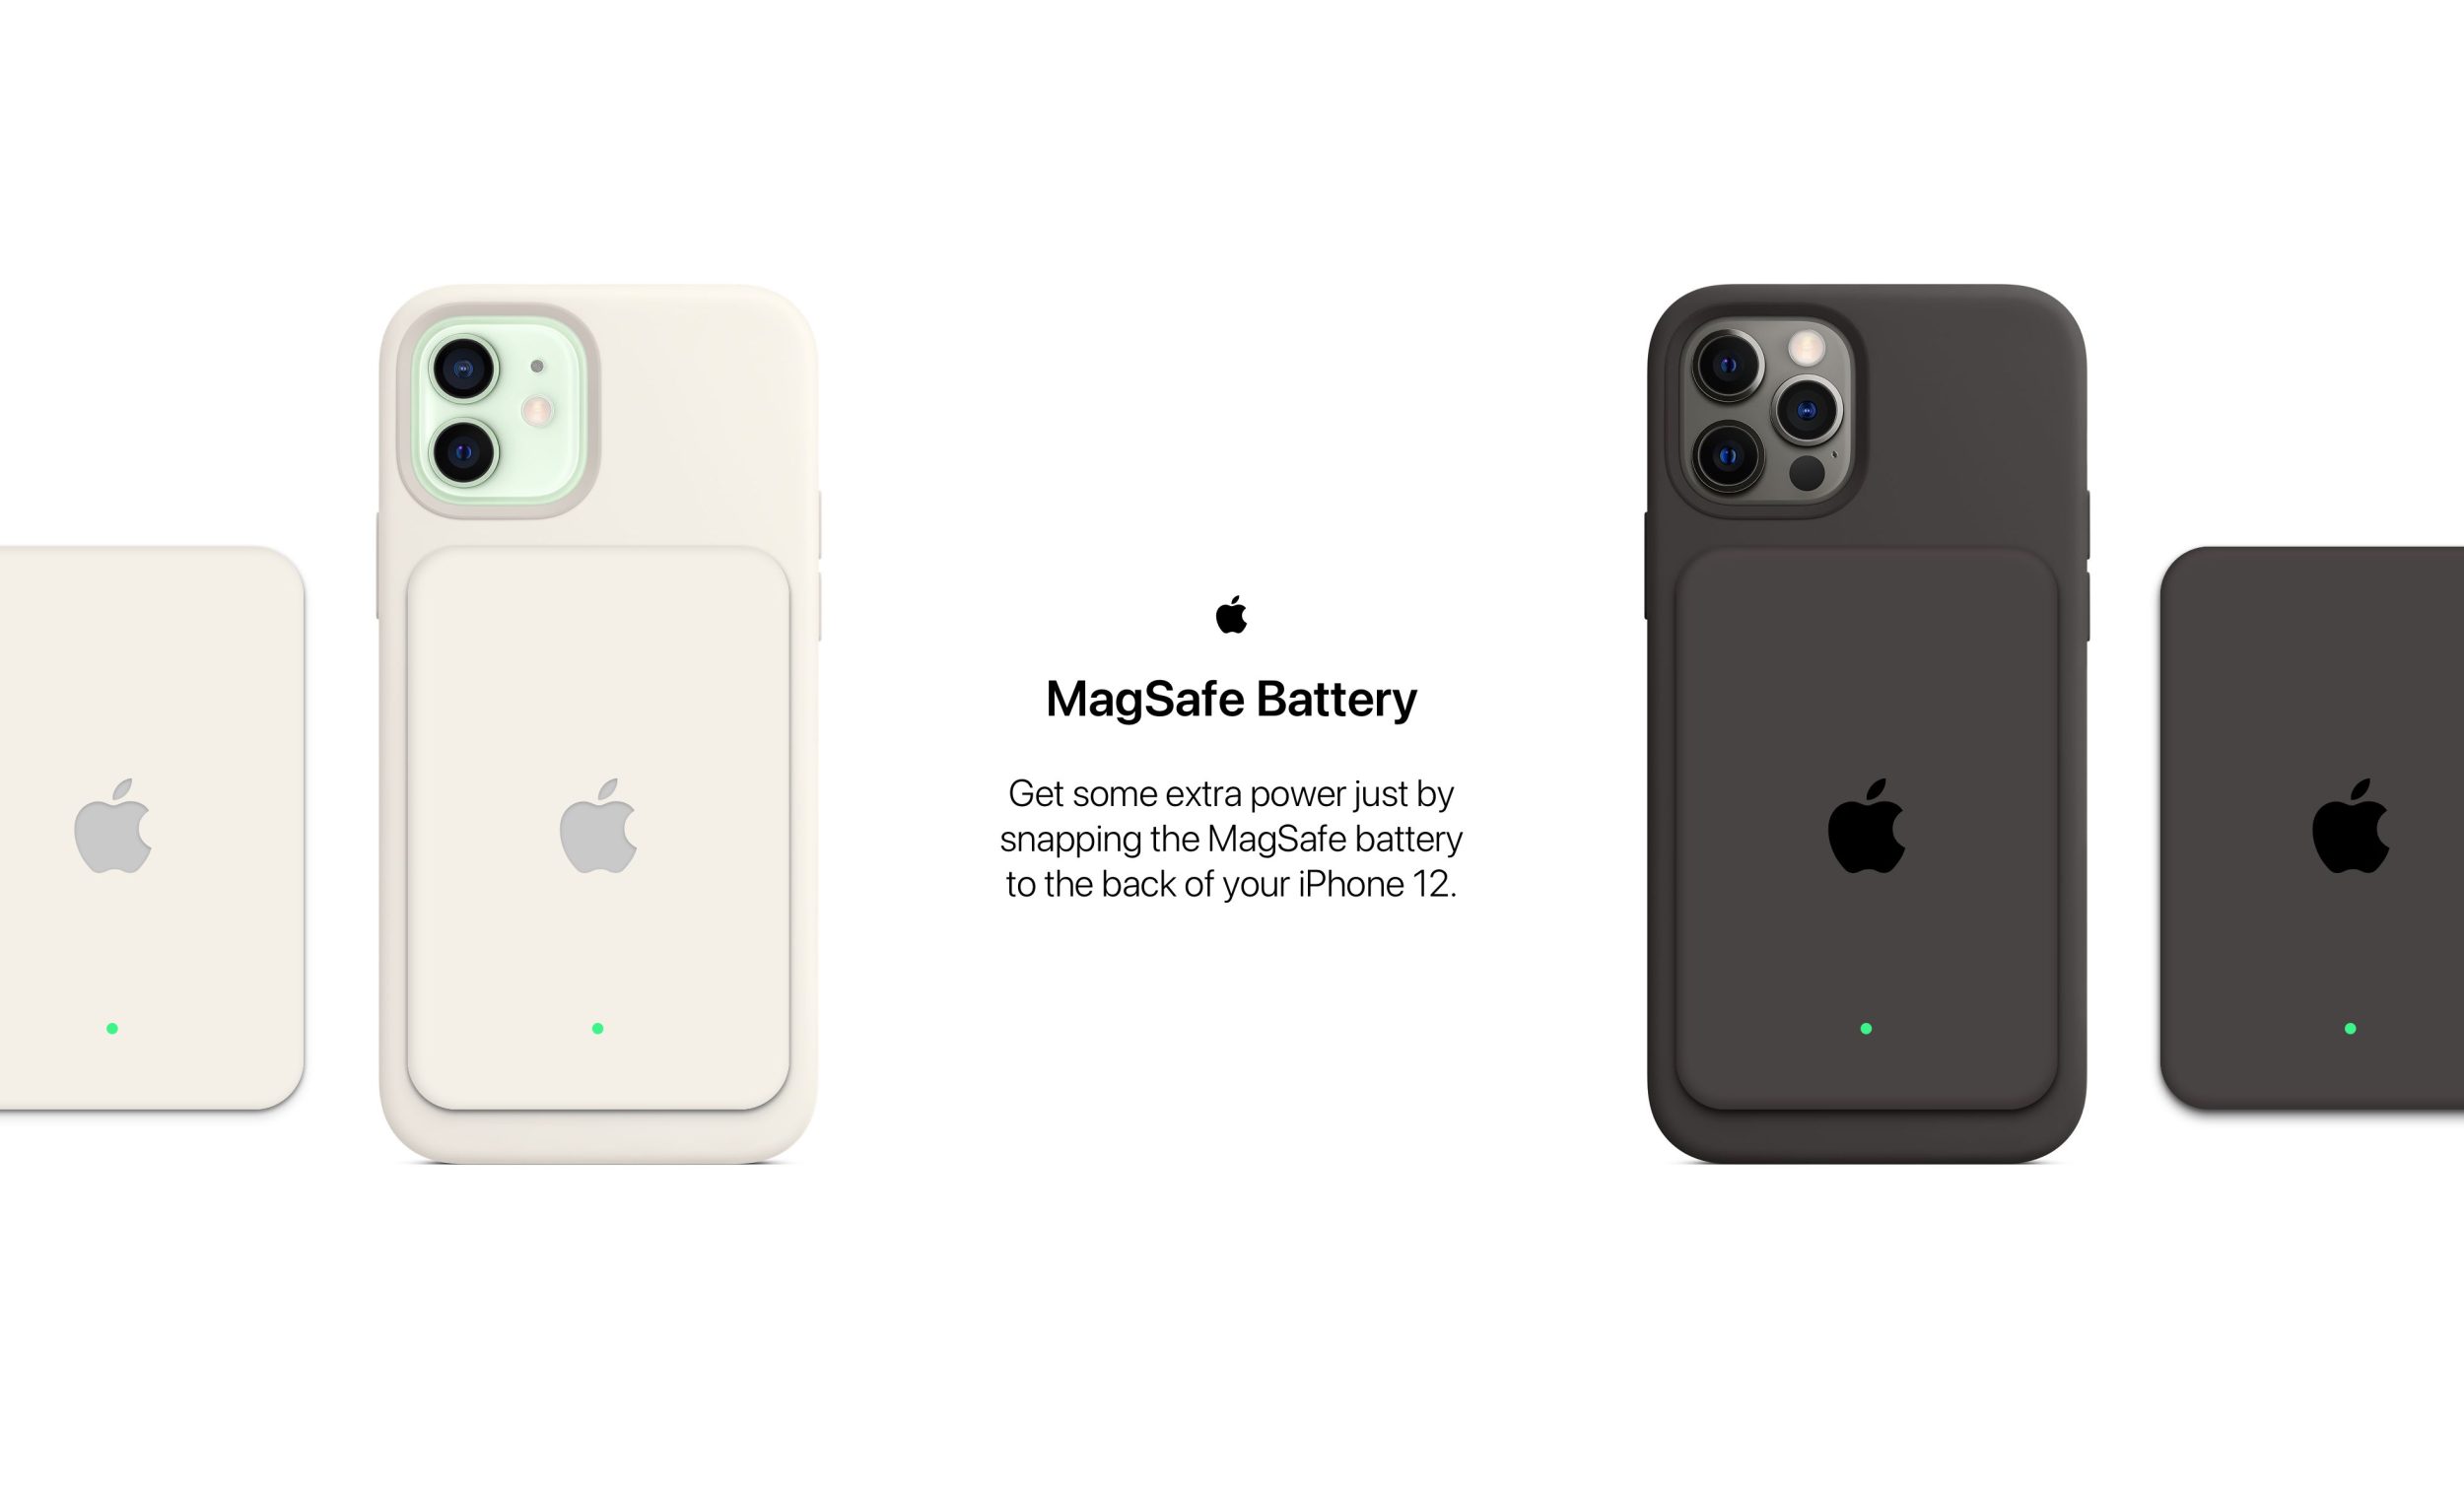 Apple reportedly developing MagSafe battery pack for iPhone 12 - 9to5Mac